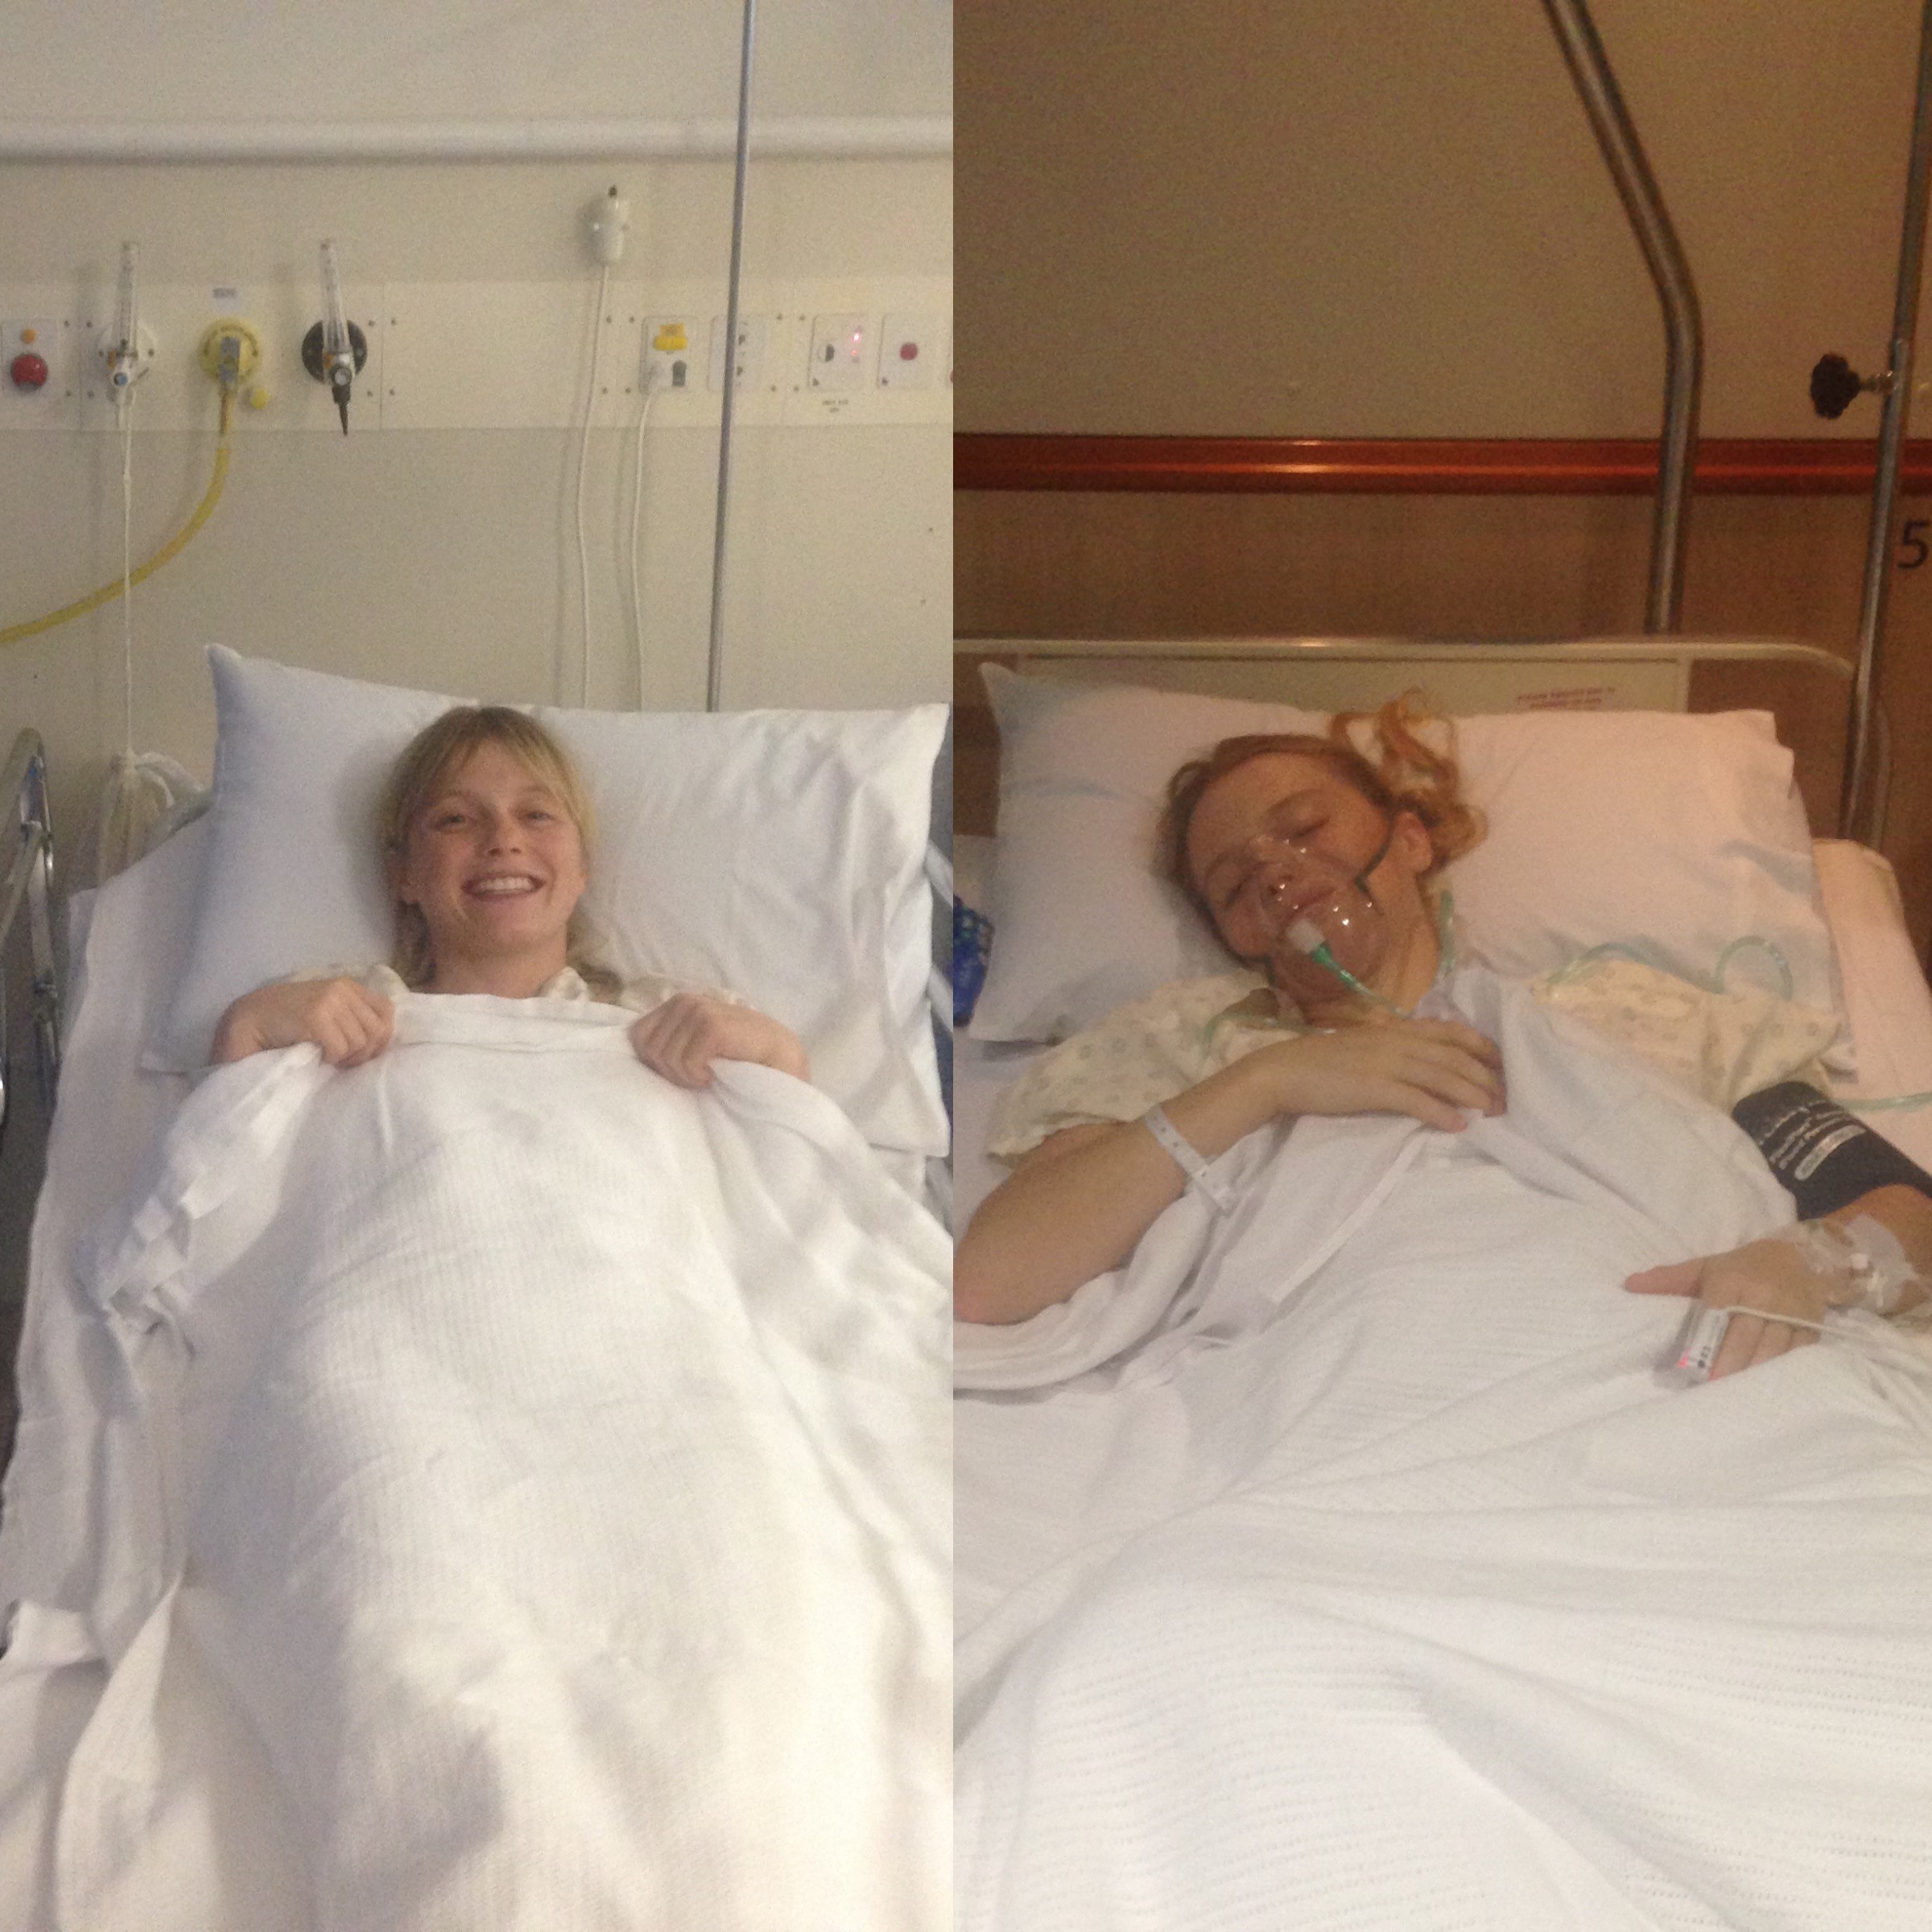 A photo of Kate before and after surgery.